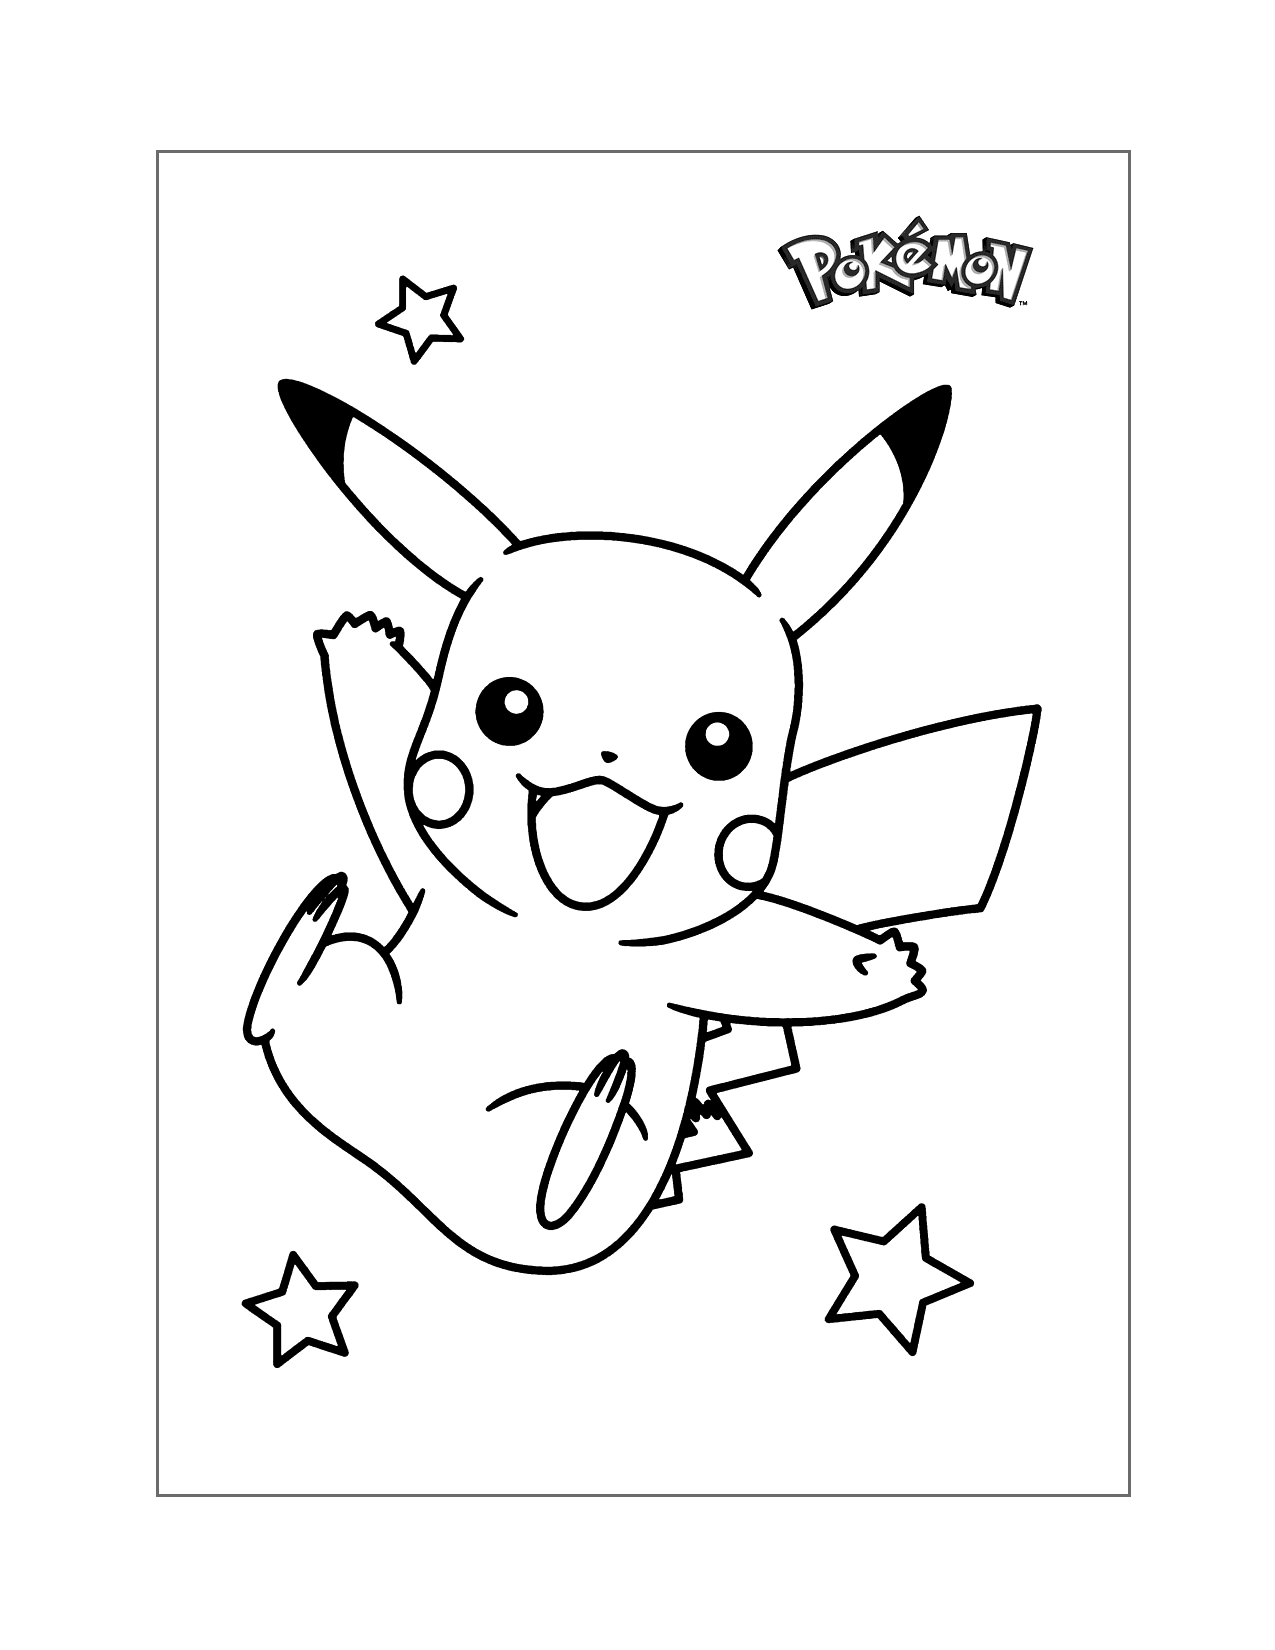 Free Pikachu Coloring Pages